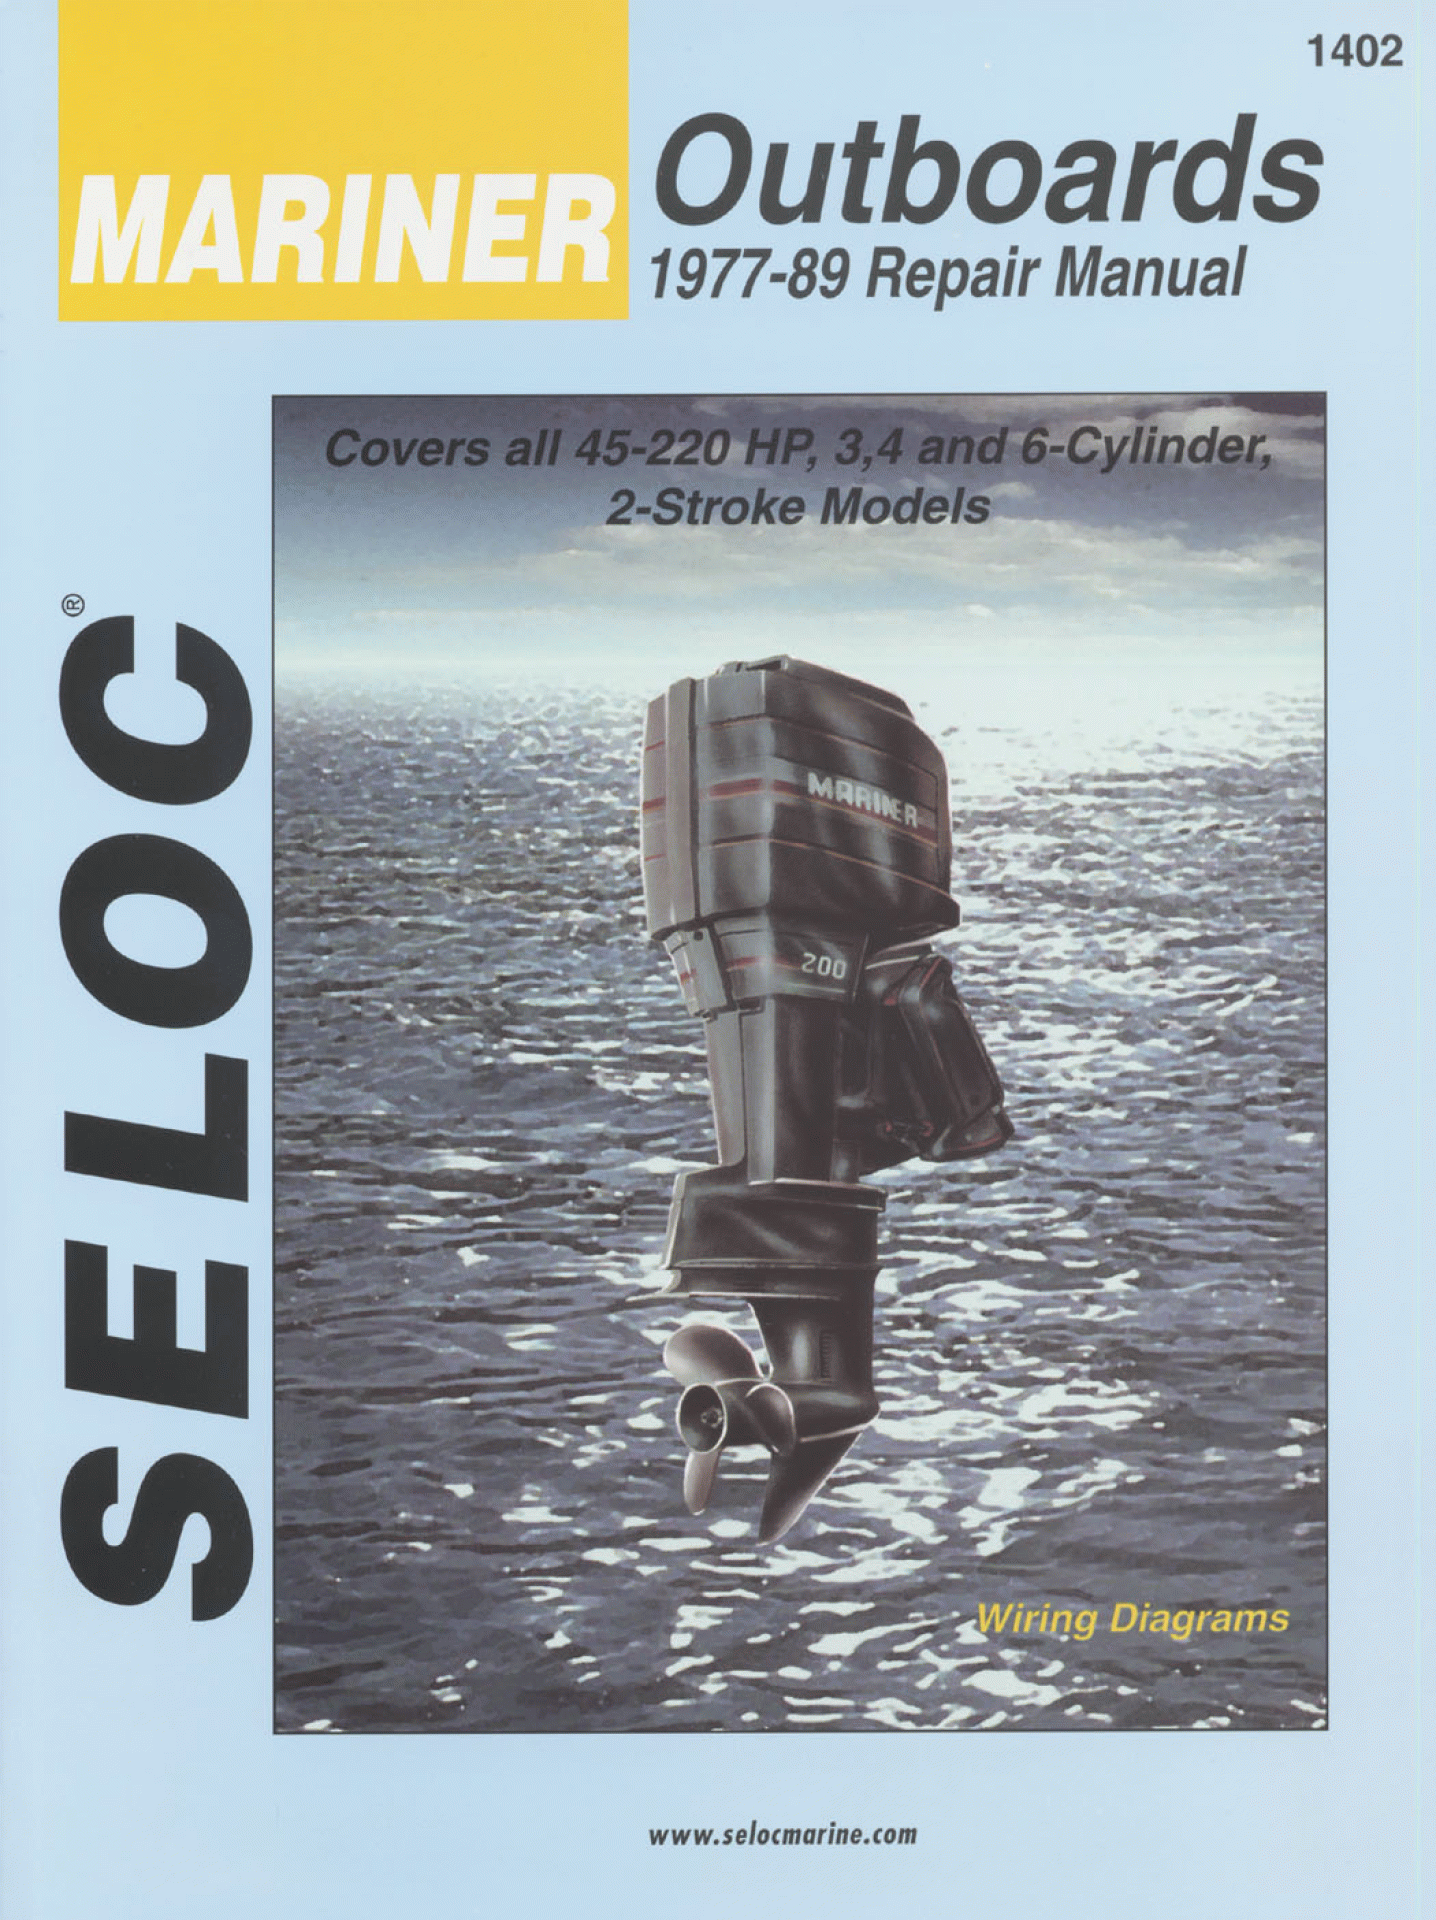 SELOC PUBLISHING | 18-01402 | REPAIR MANUAL Mariner Outboards 3 4 & 6 Cyl 1977-89